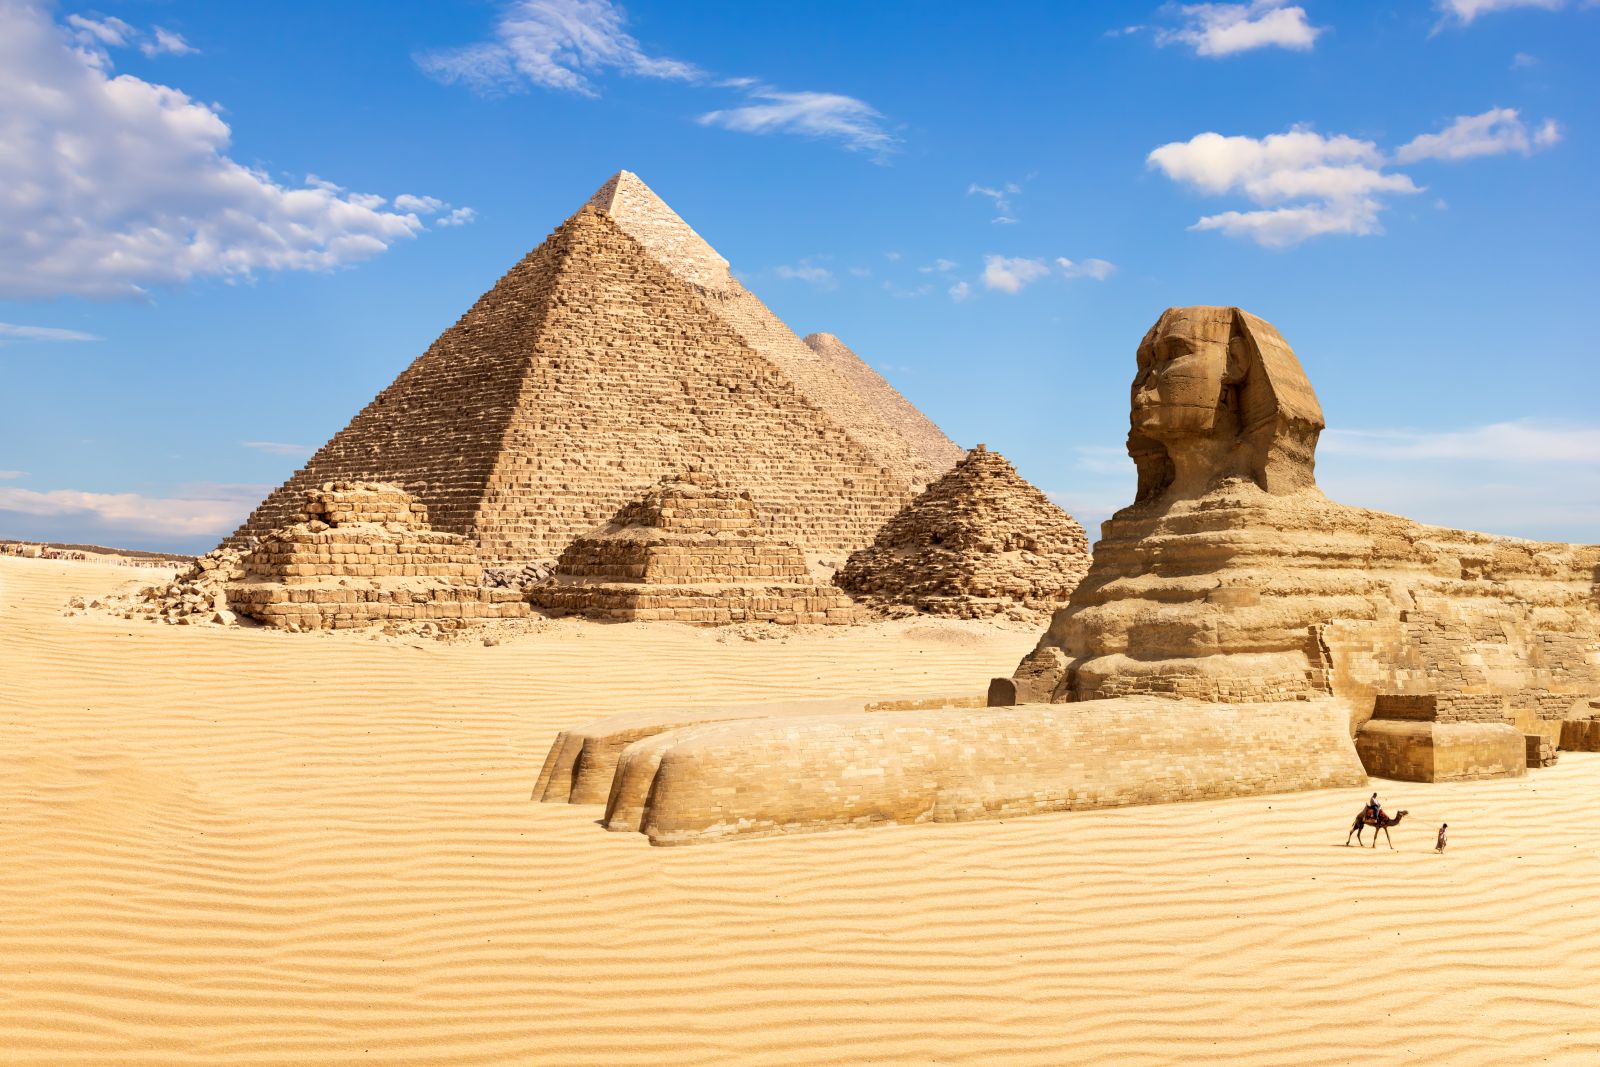 Pyramids of Giza and the great Sphinx in Egypt